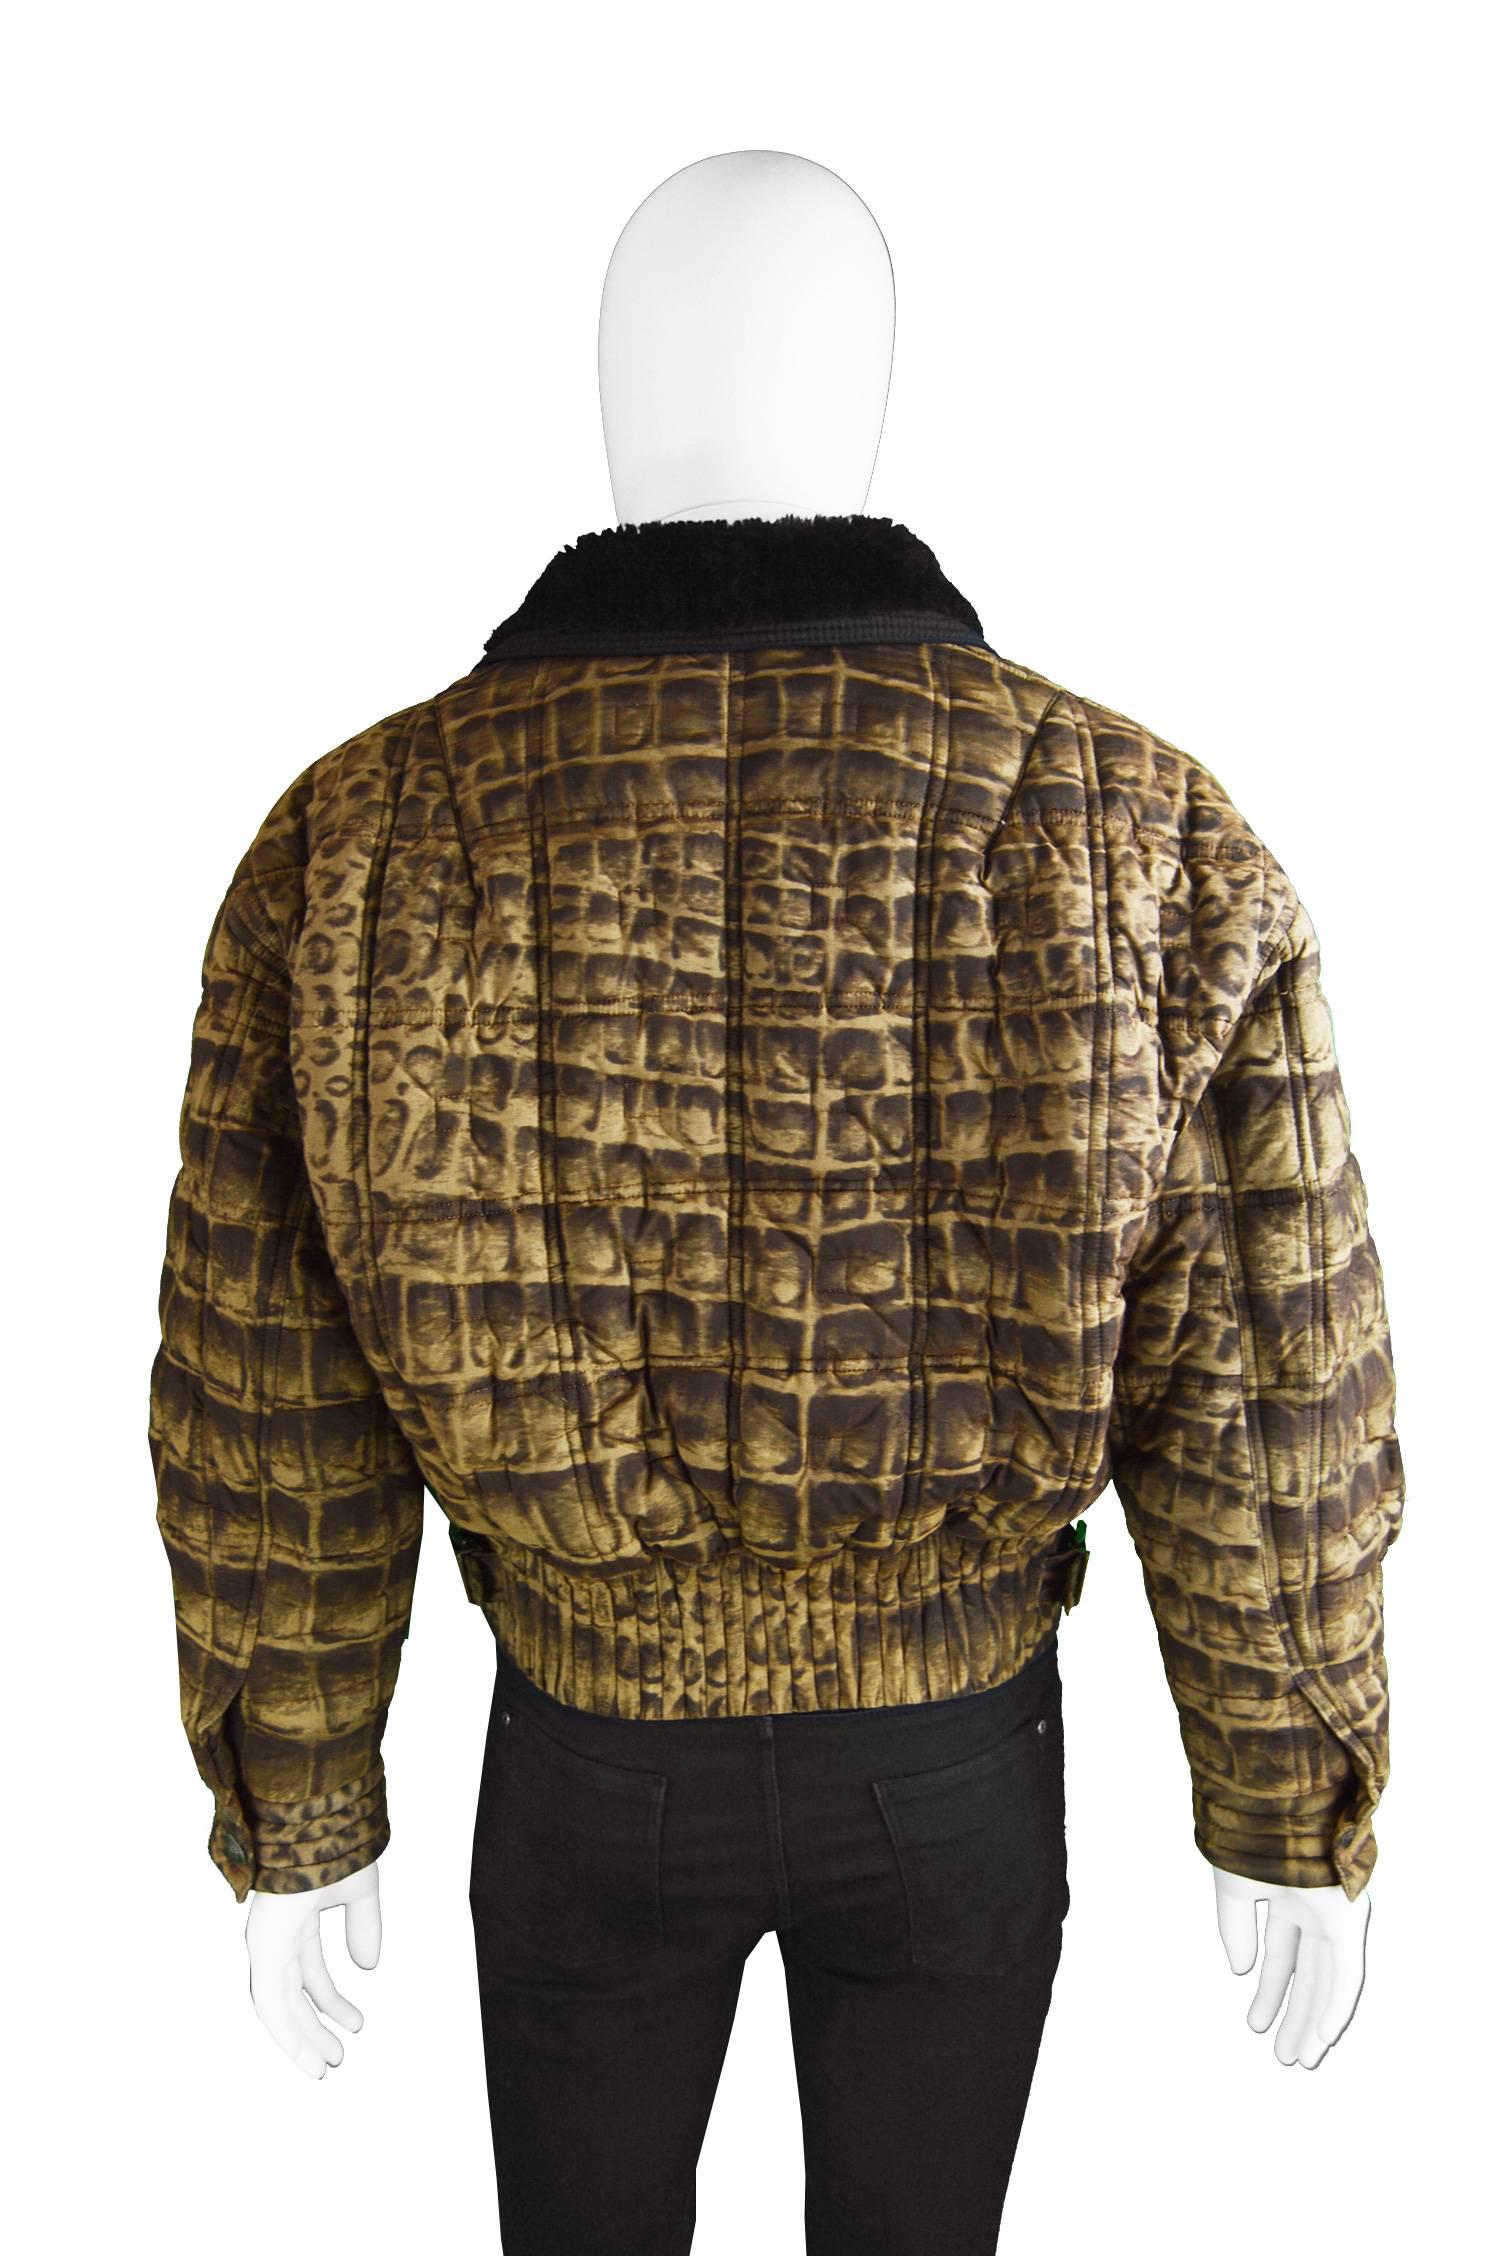 Gianni Versace Men's Quilted Puffer Coat with Shearling Collar, c. 1992 For Sale 1